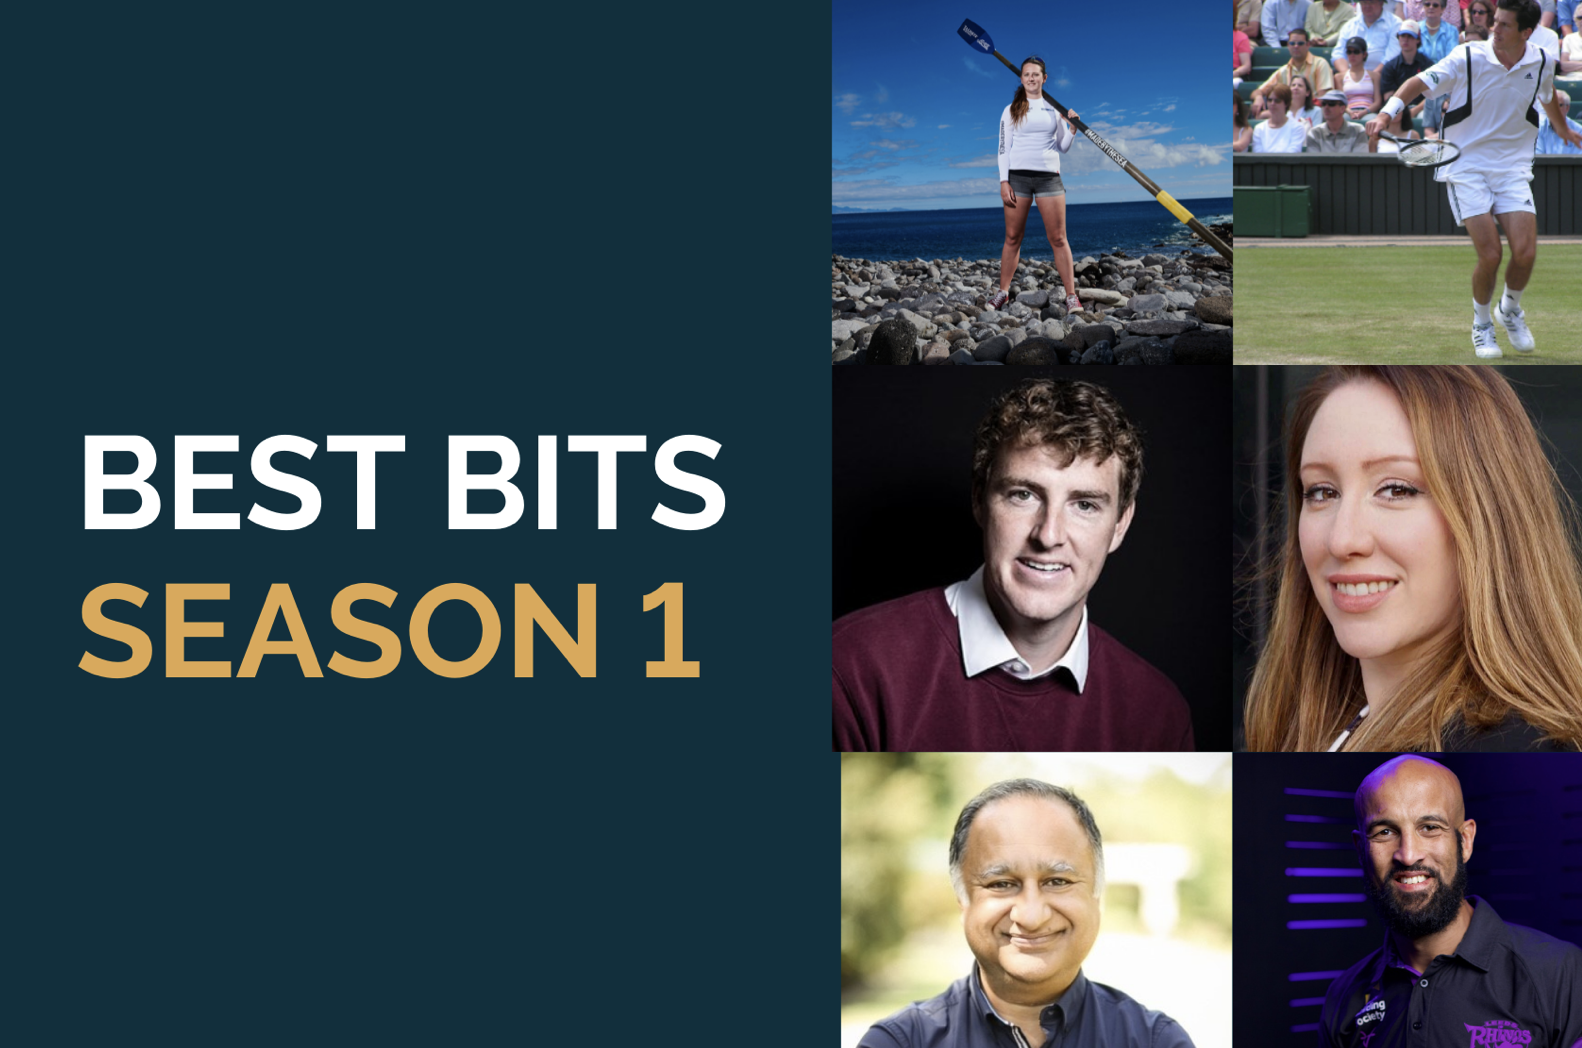 Catch up with a fantastic season of fascinating and inspirational stories